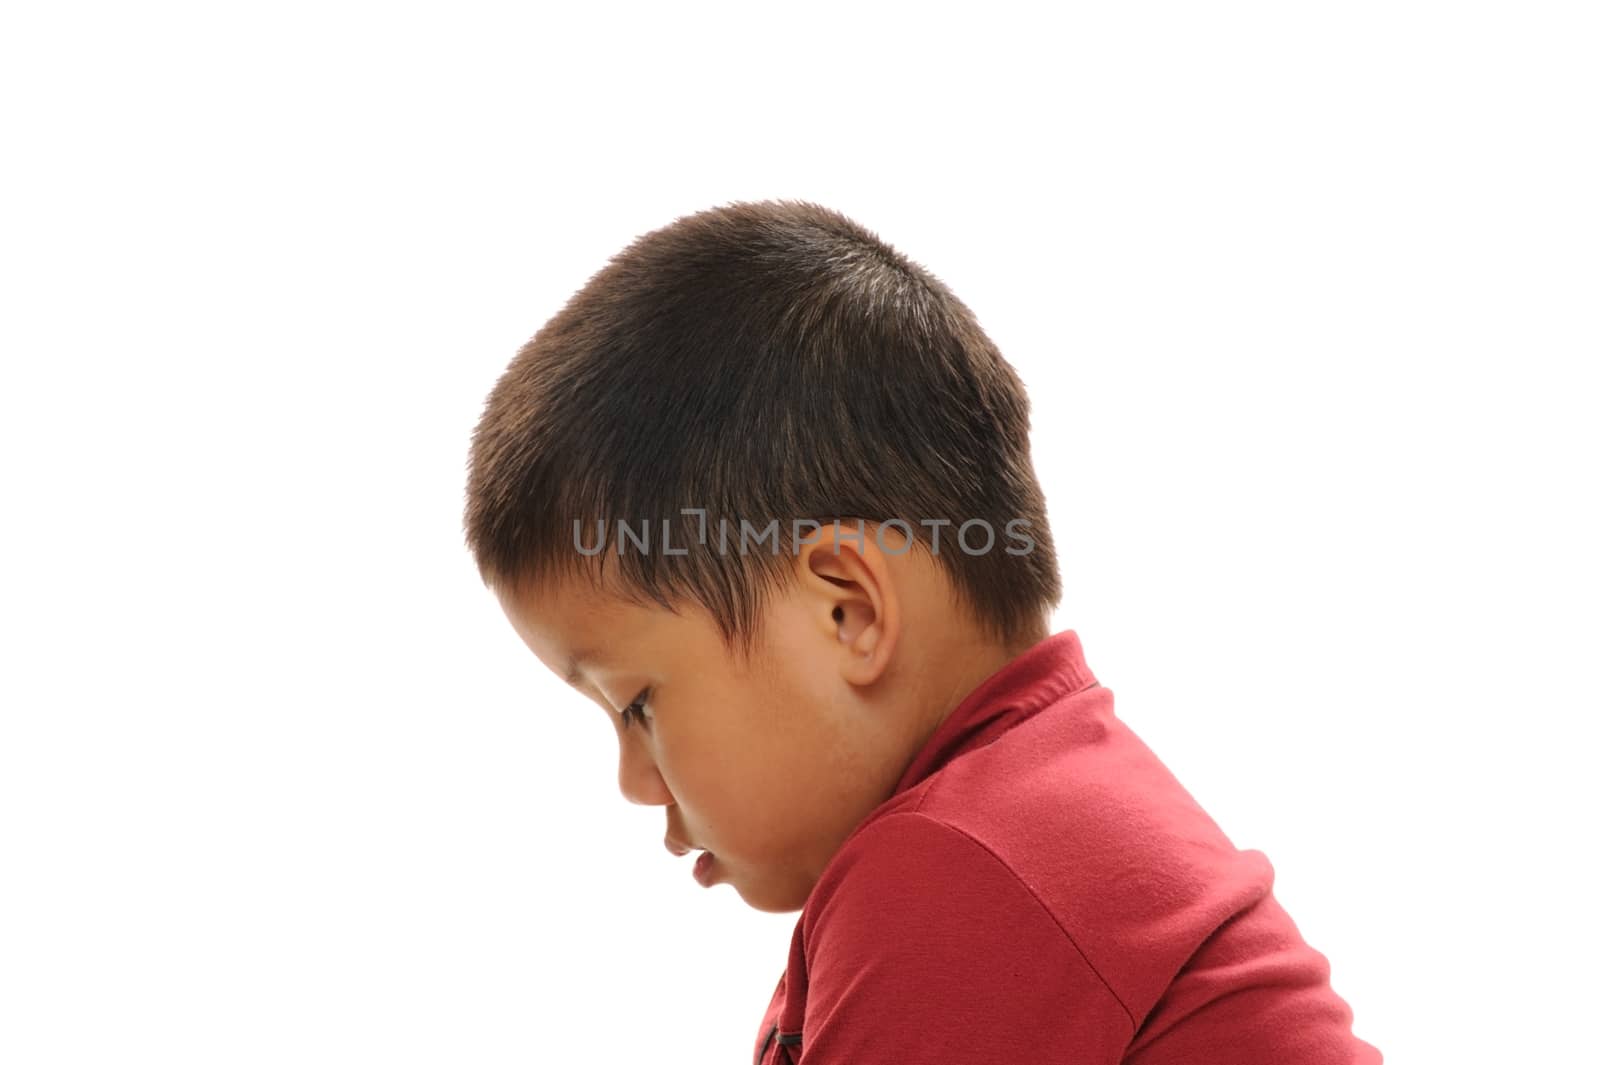 Asian boy looking sad profile view with red shirt